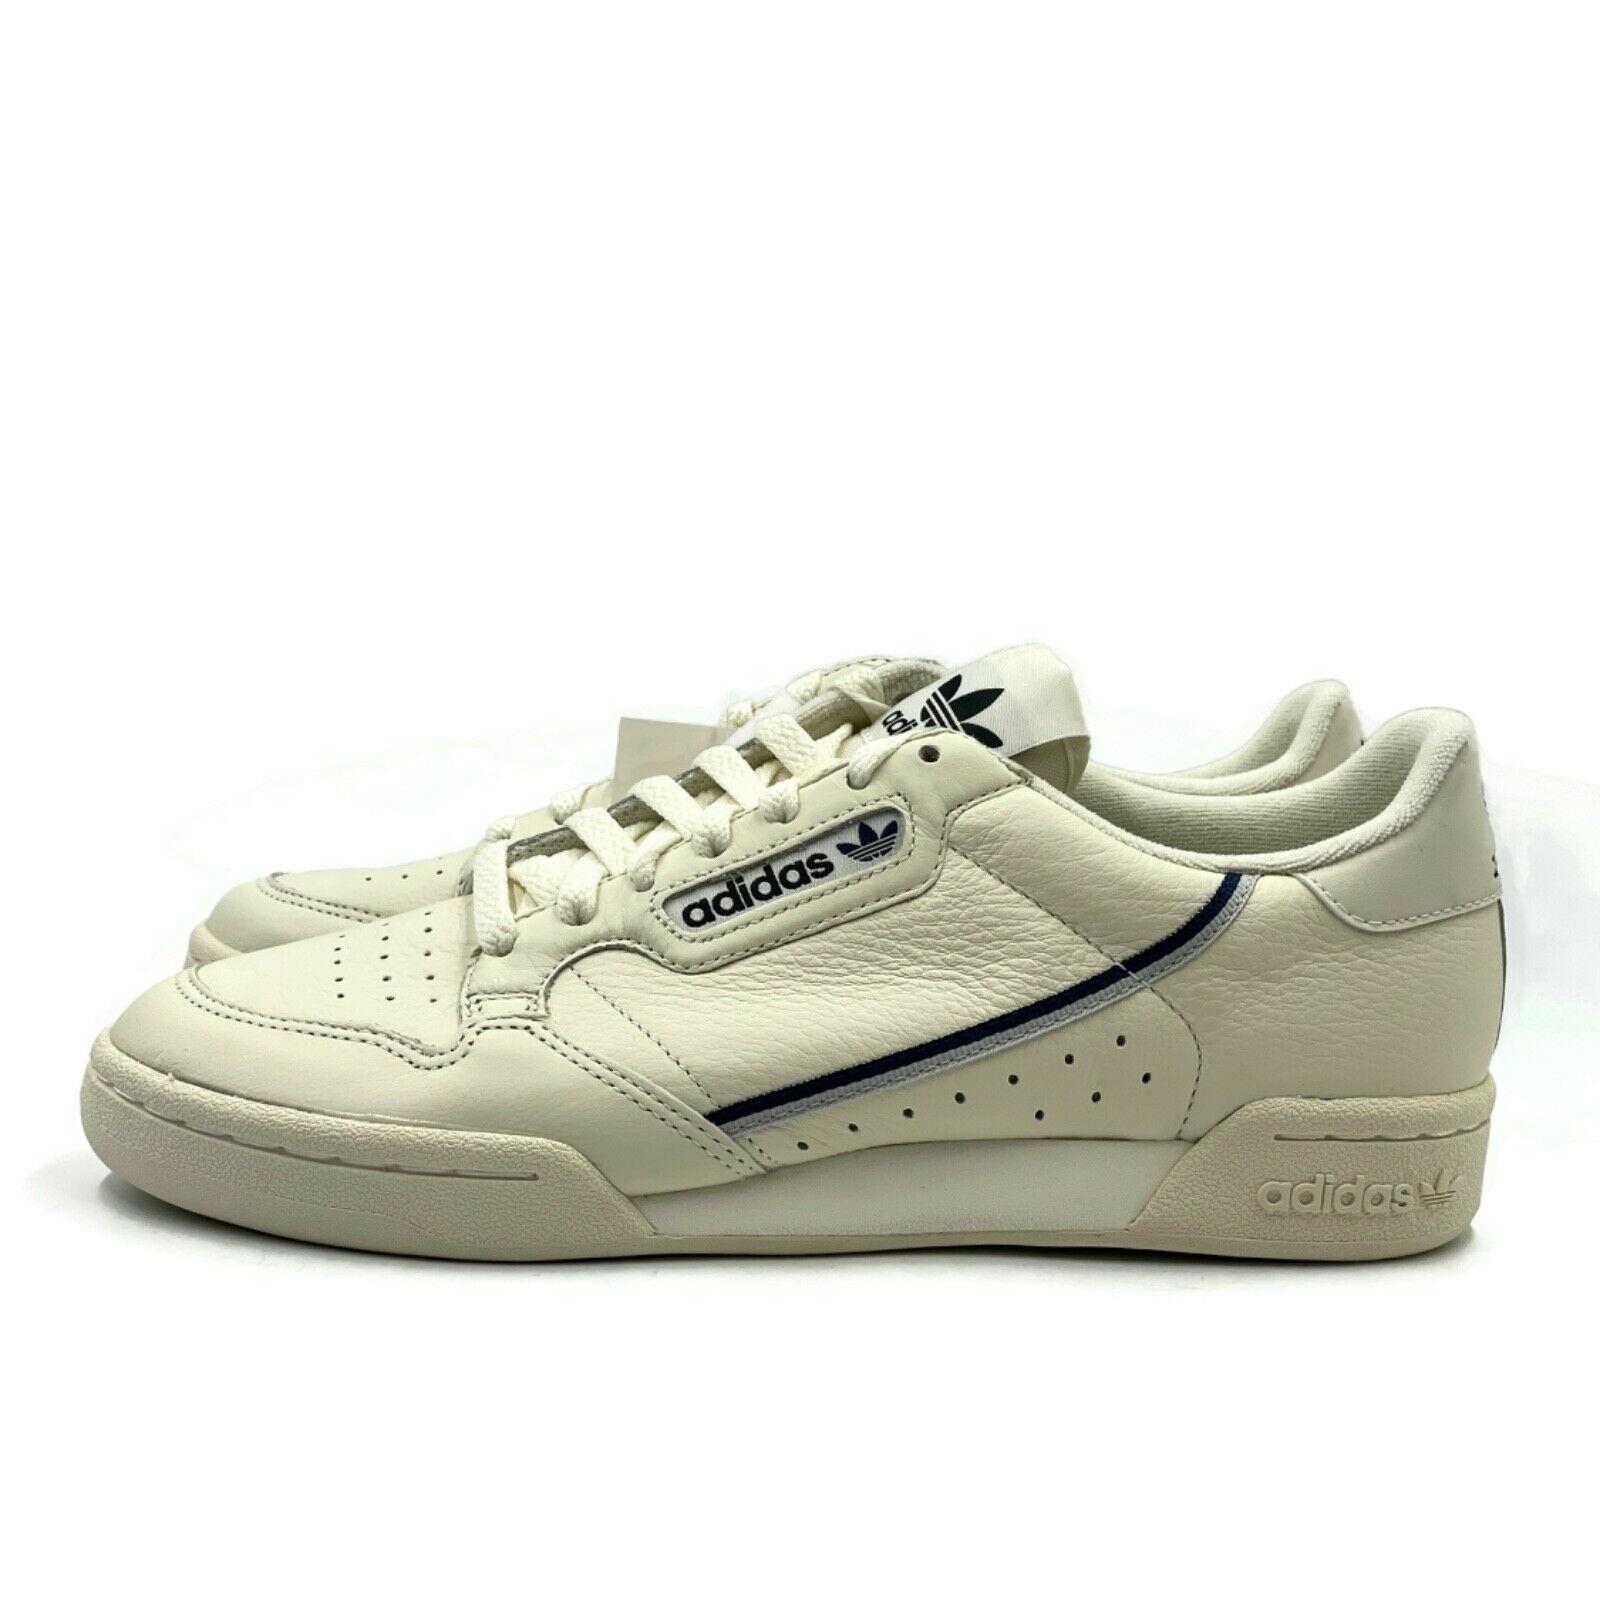 Adidas shoes Continental - Ivory White Blue 1